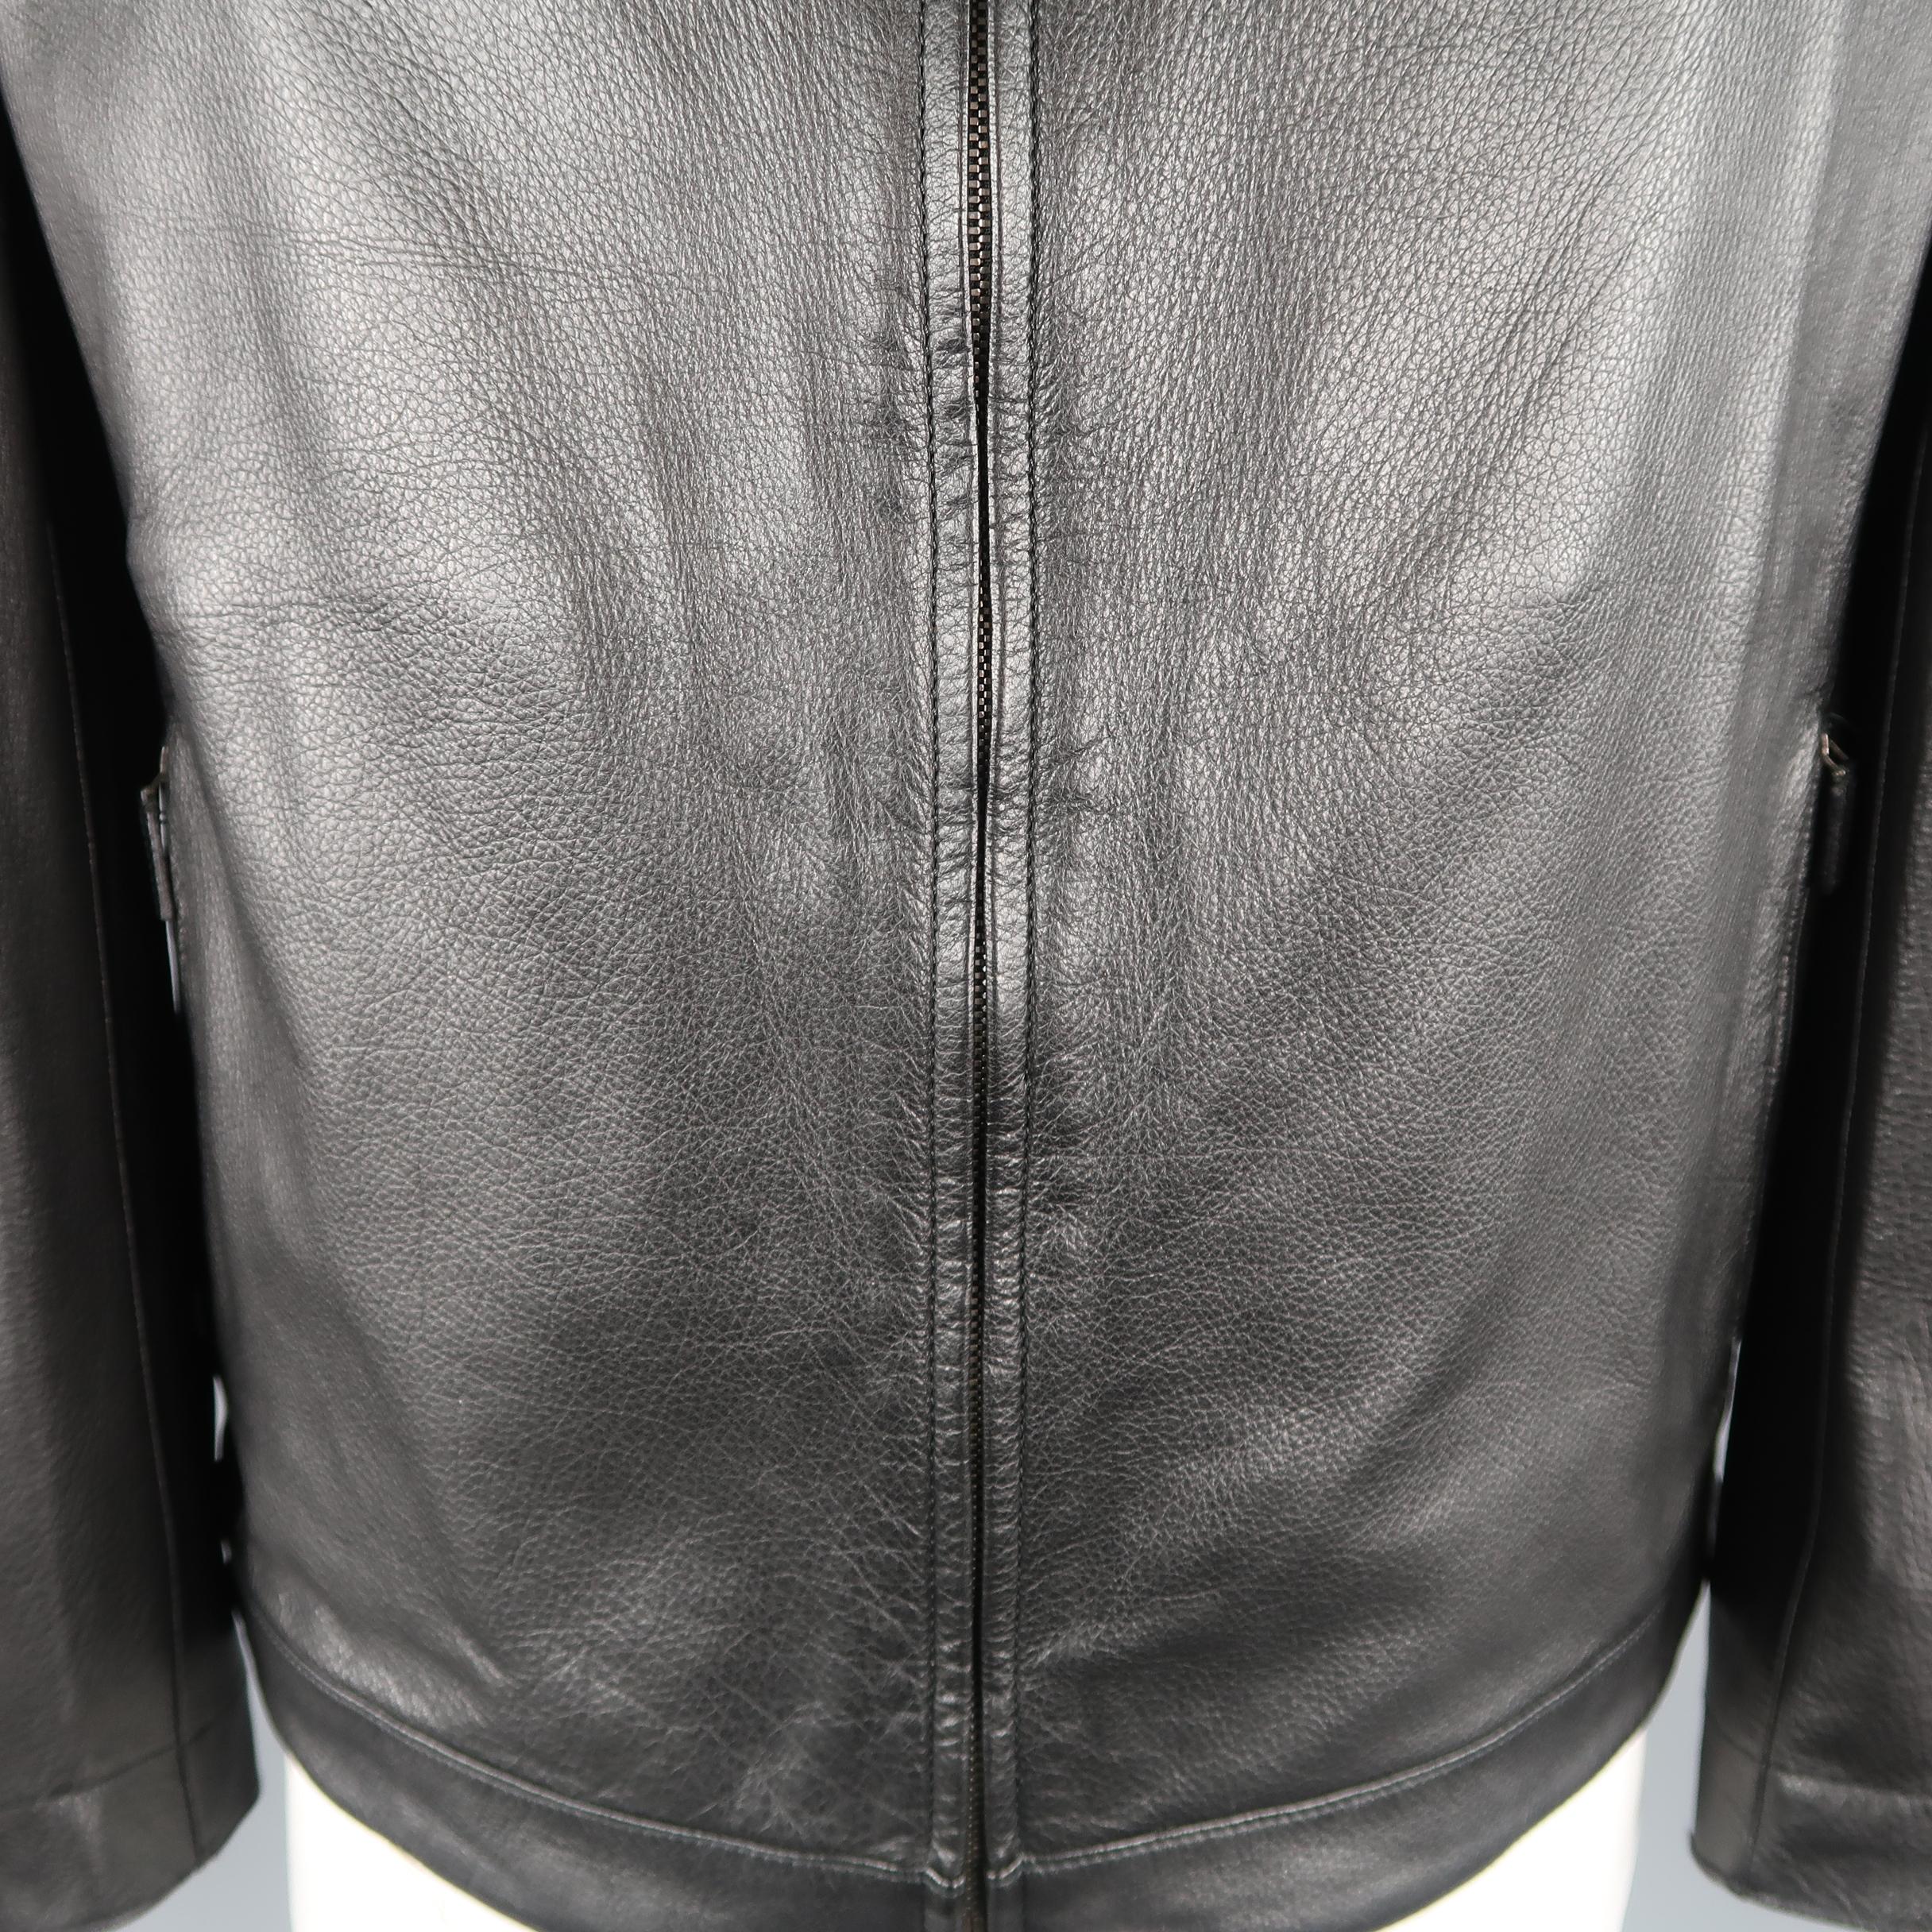 GUCCI 42 Black Textured Leather Zip Up Band Collar Motorcycle Jacket at ...